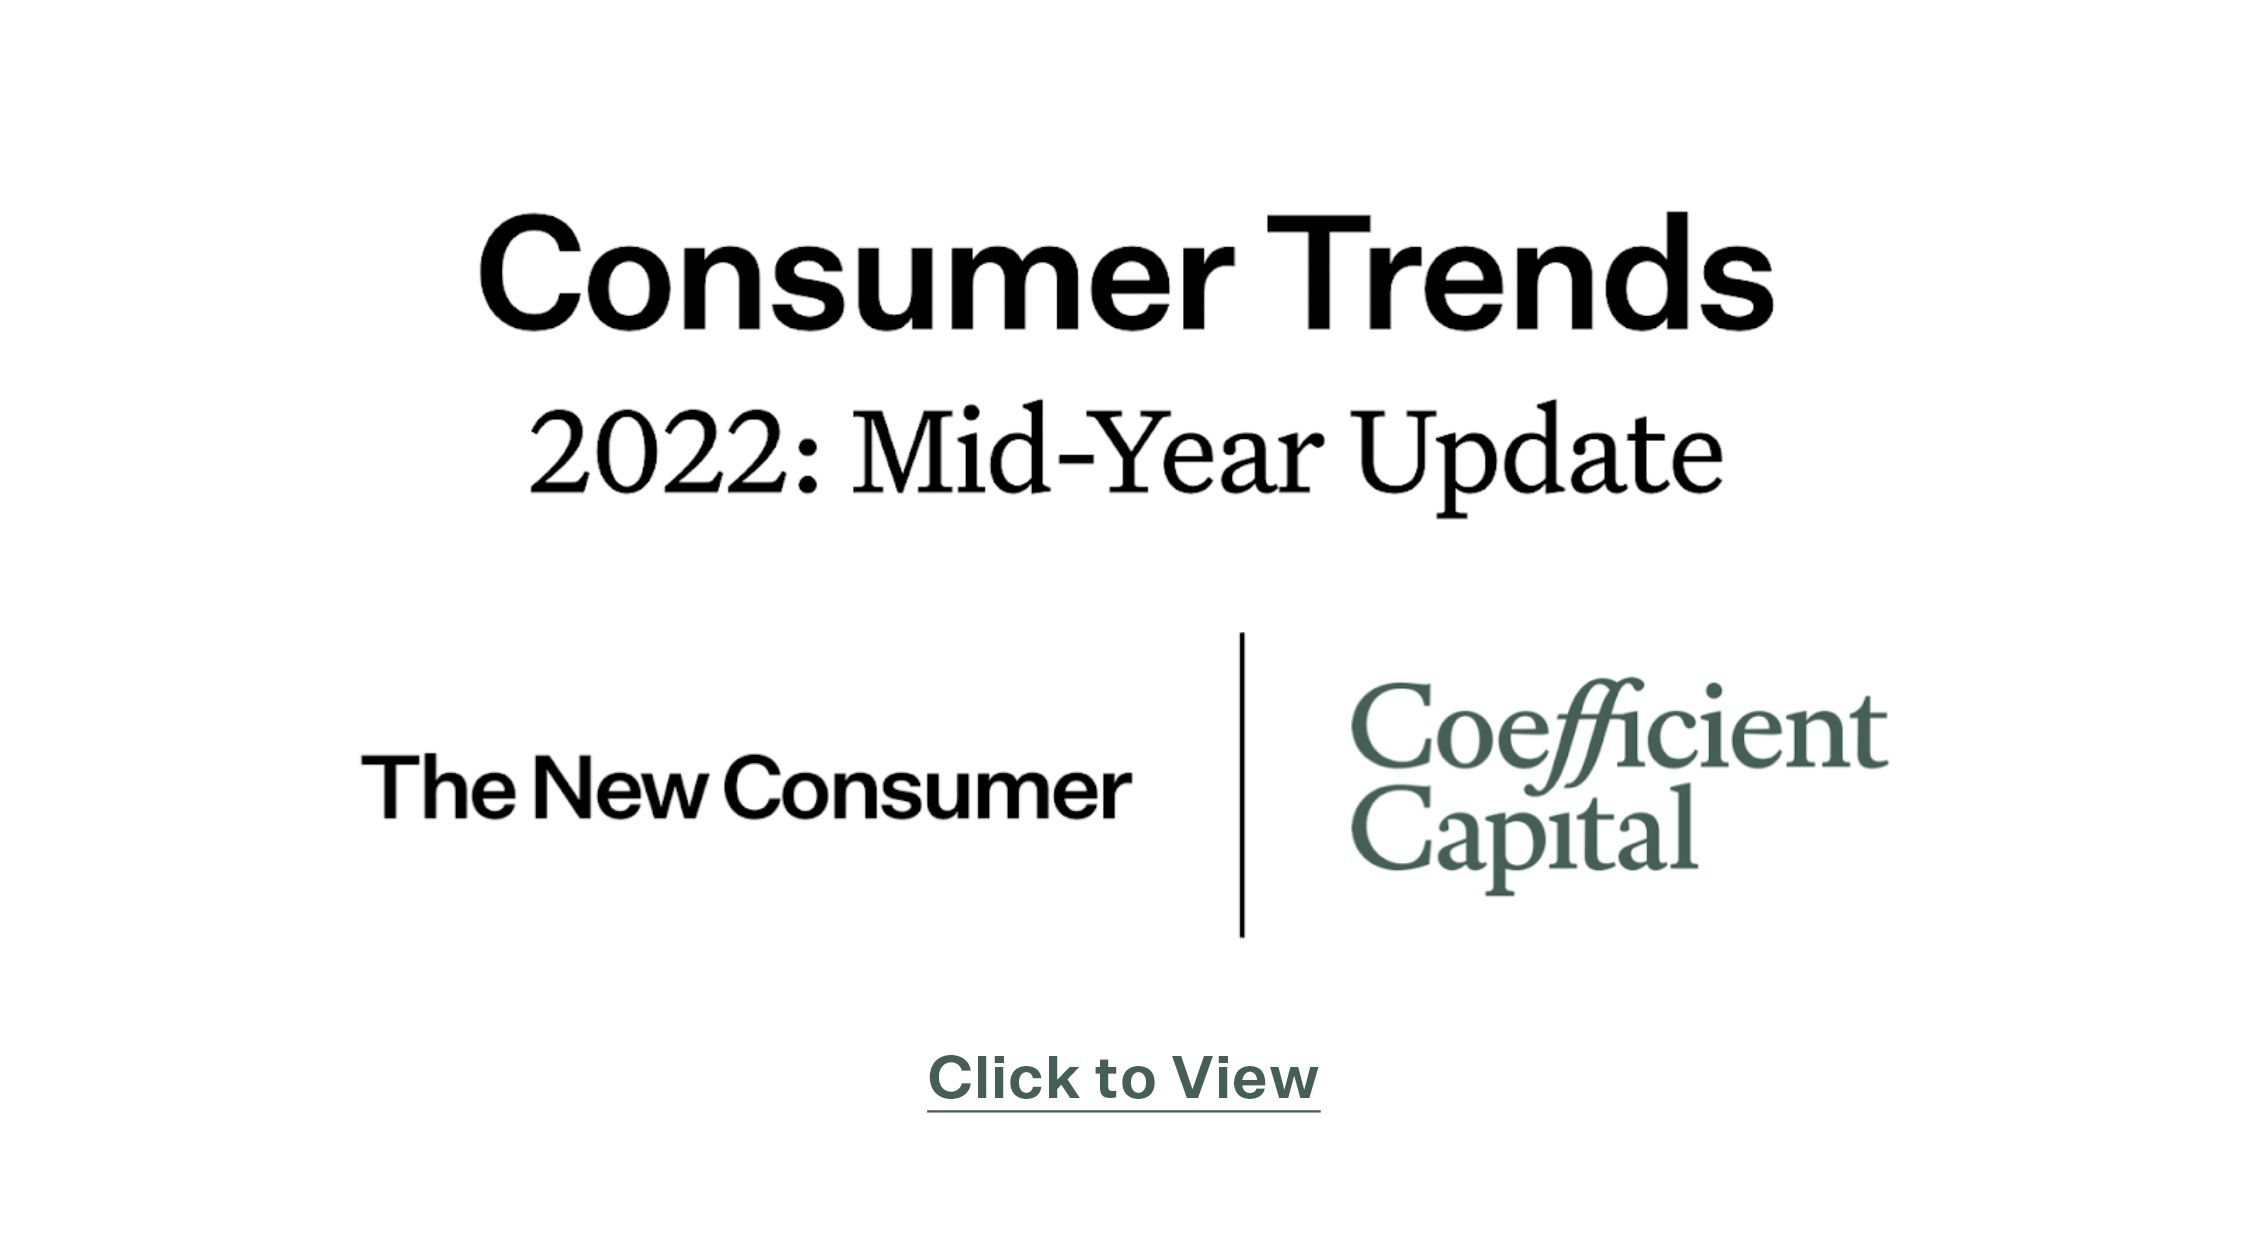 Consumer Trends 2022: Mid-Year Update